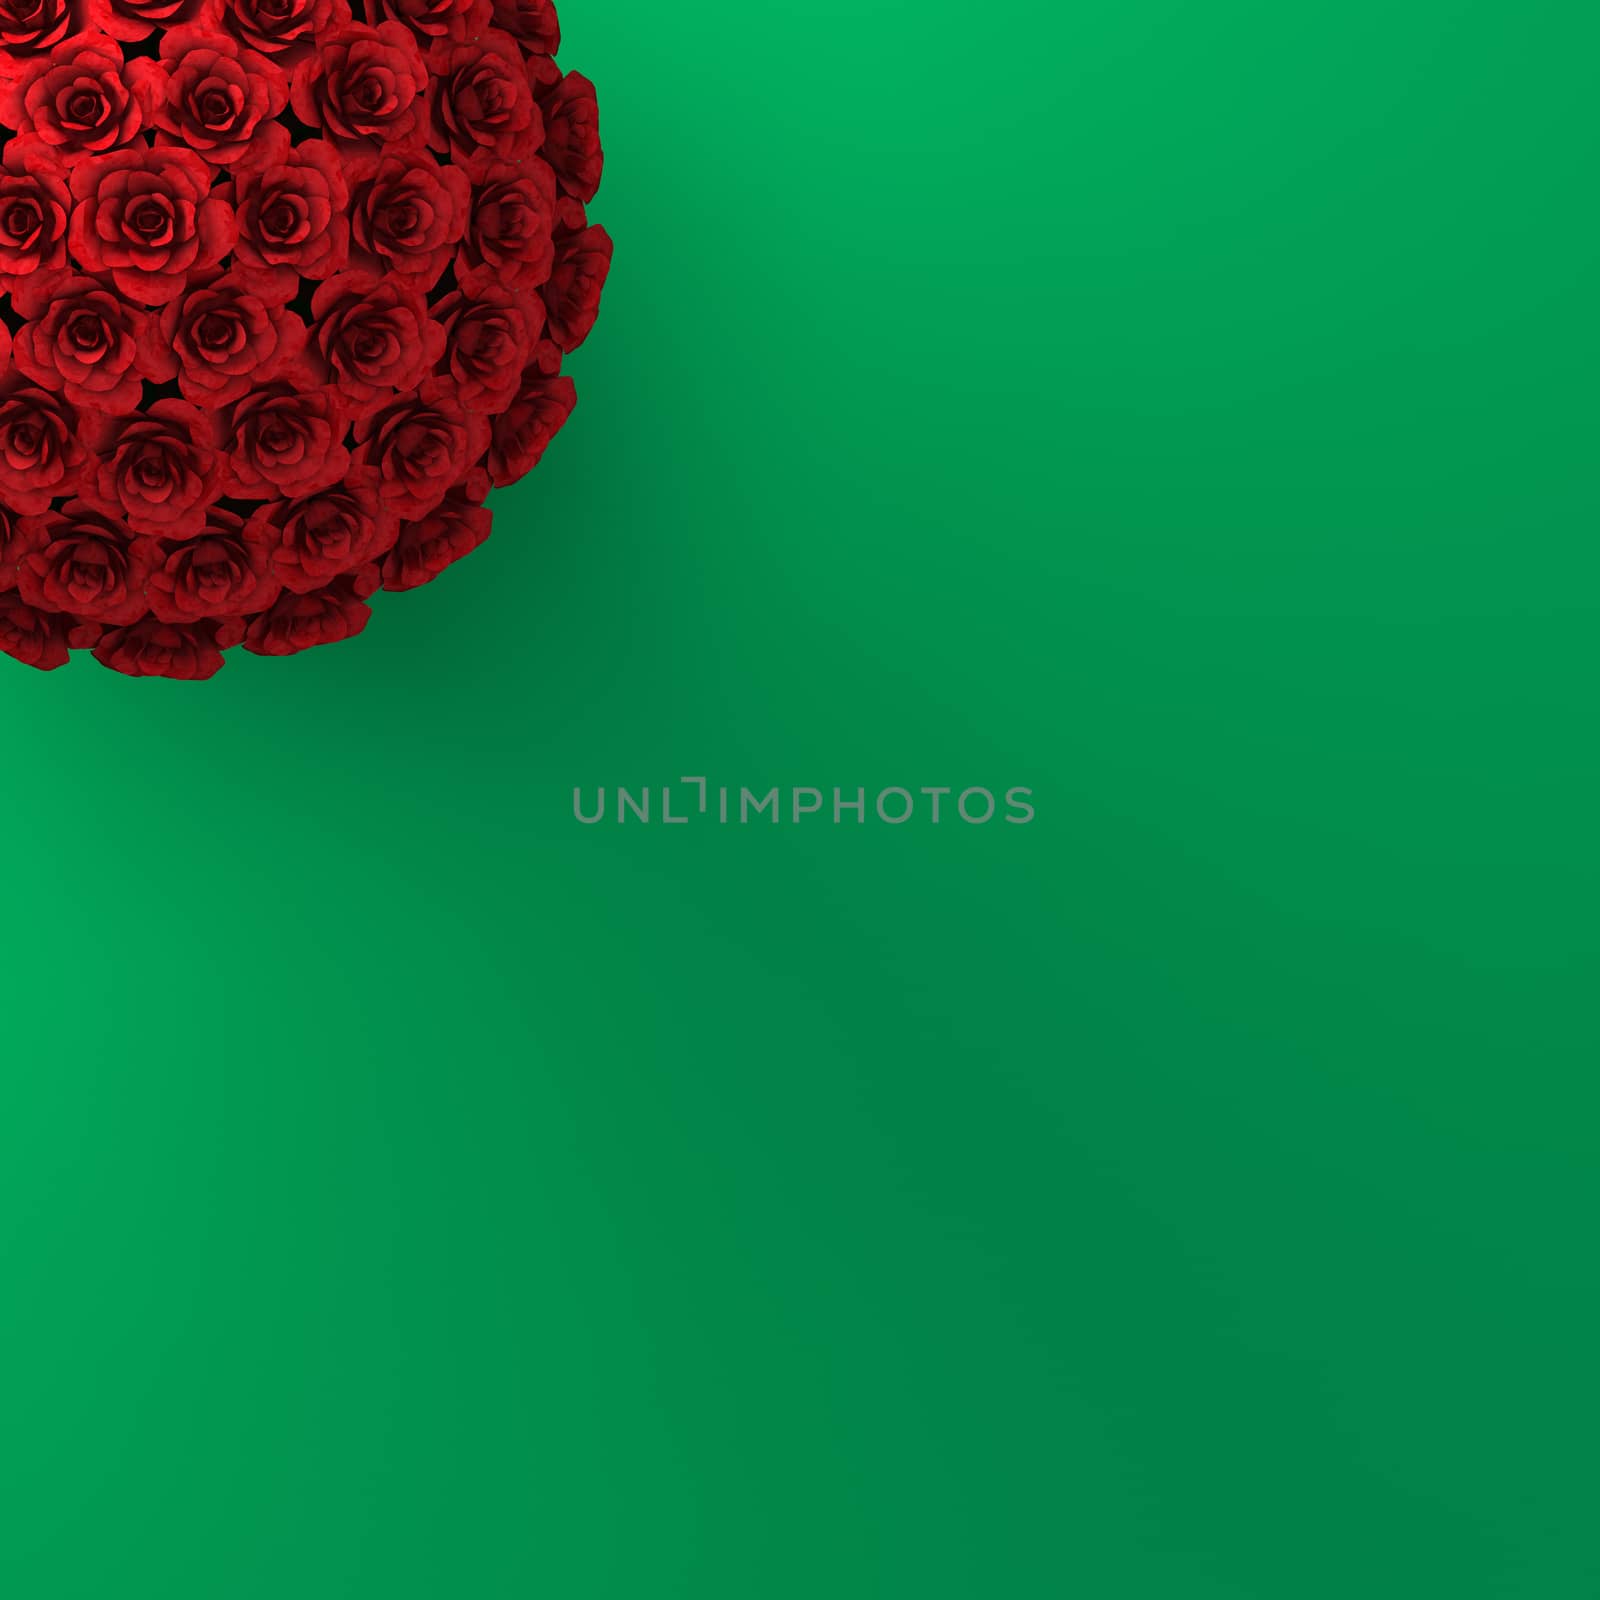 TOP VIEW OF ROSES ON PLAIN GREEN BACKGROUND